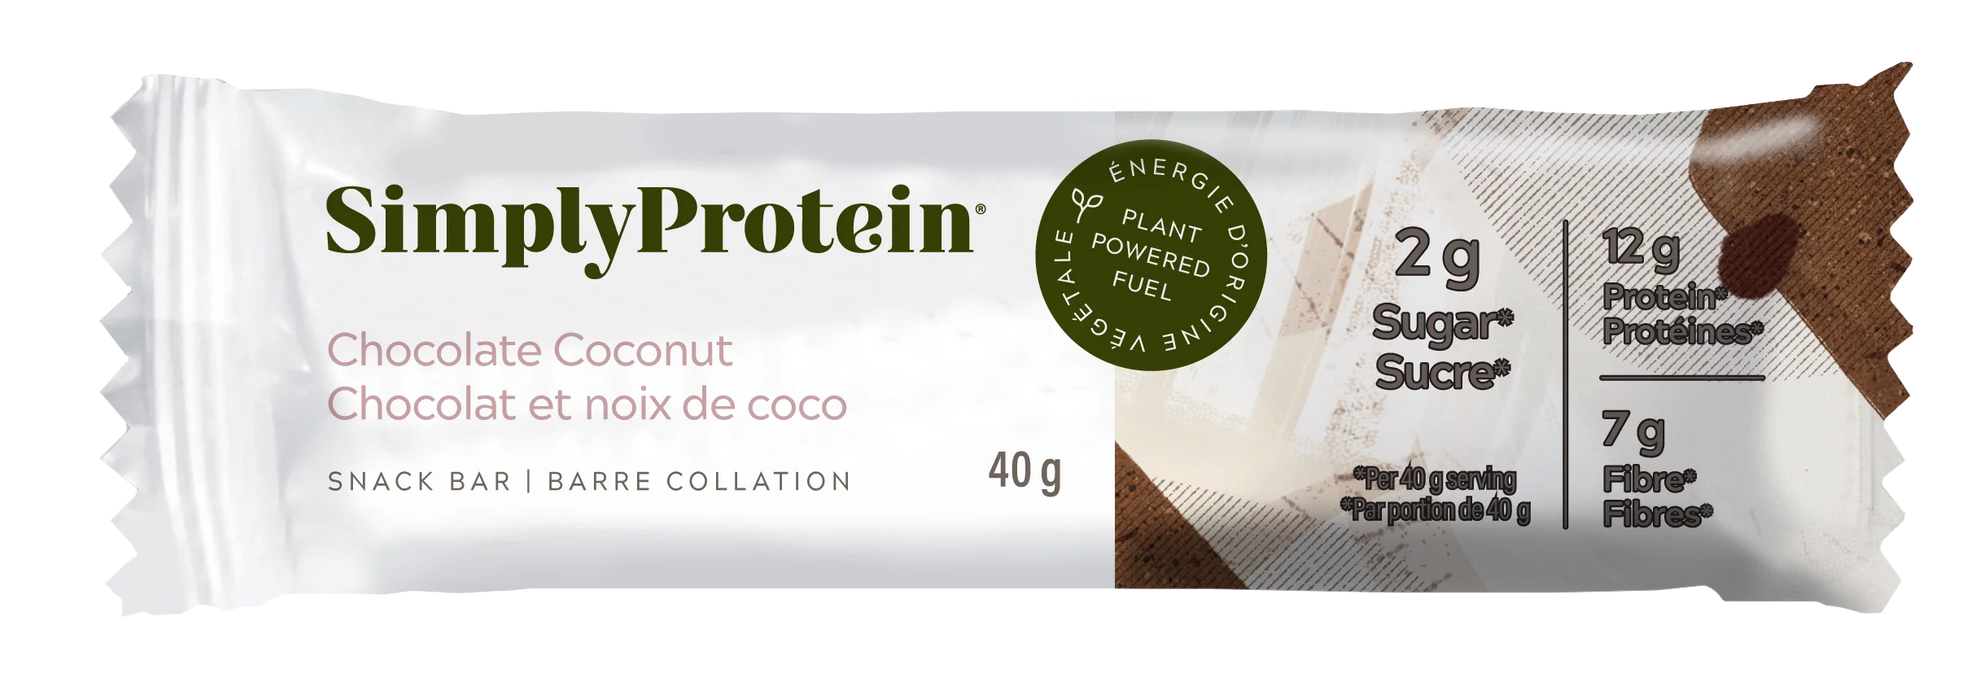 Simply Protein - Chocolate Coconut, 40 g